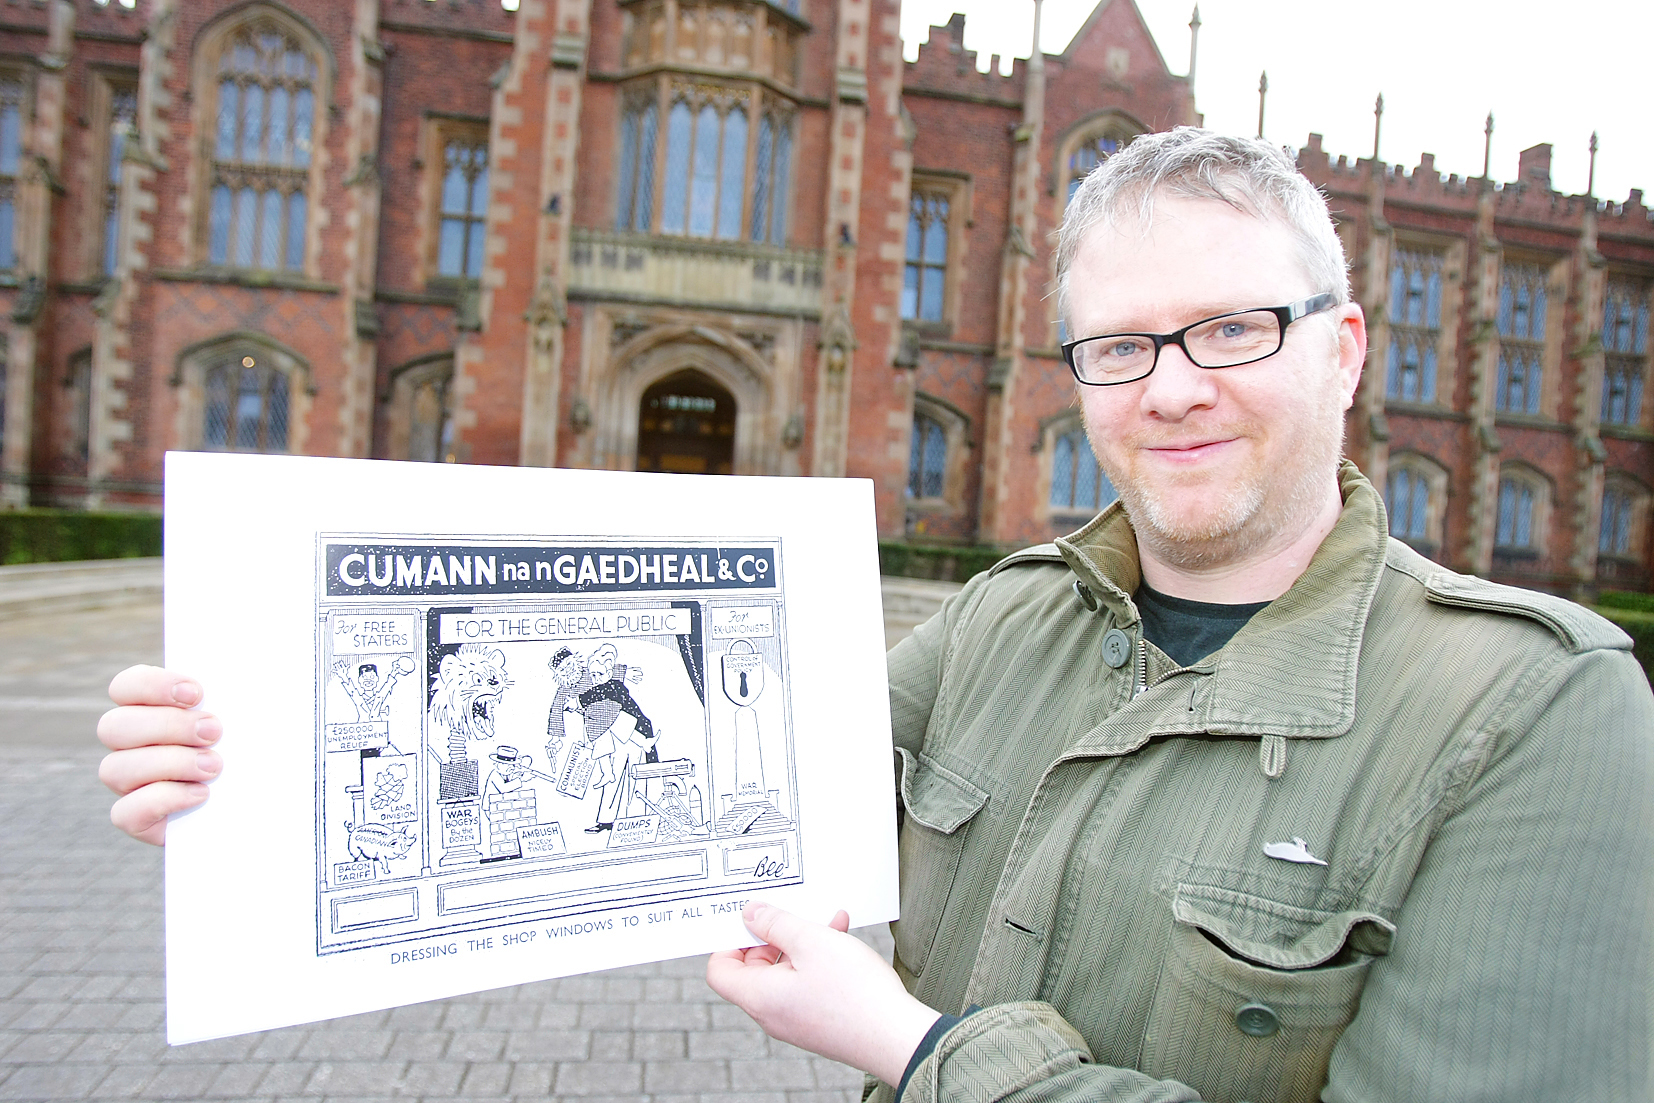 Barry Sheppard with one of the cartoons from his exhibition, which focuses on the economic and political dynamics of 1930s Ireland